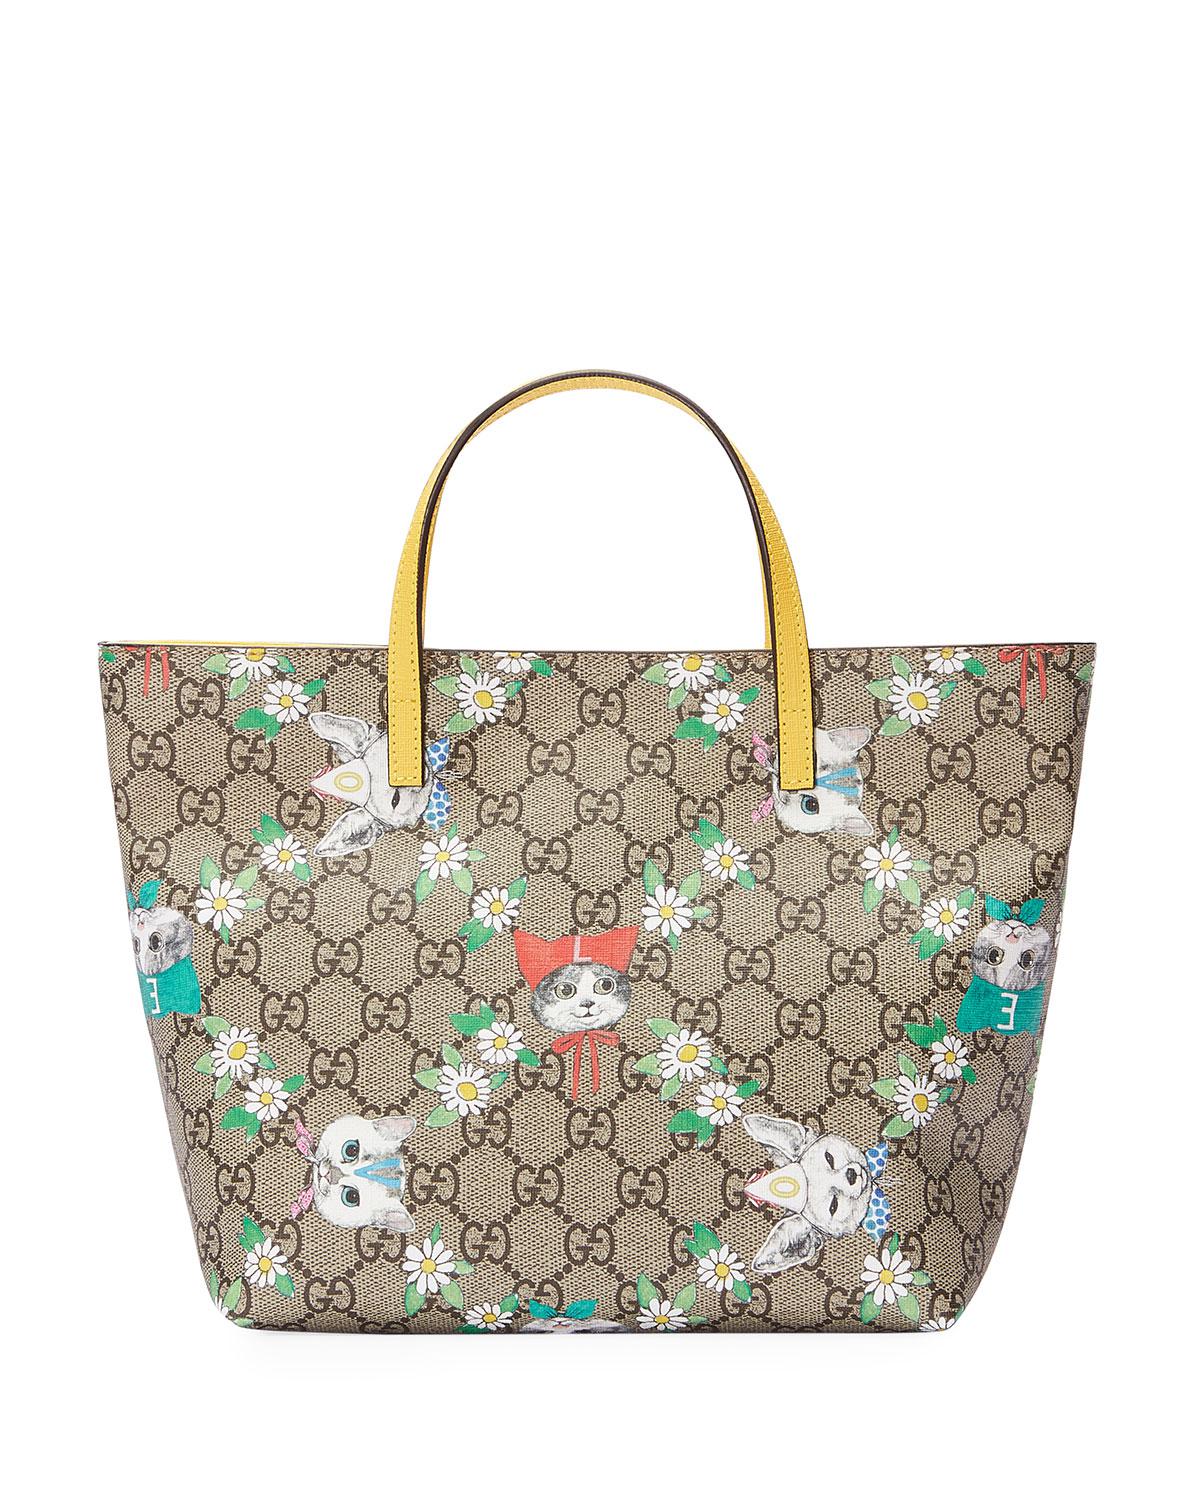 Gucci Leather Girls&#39; Gg Supreme Pets Tote Bag in Beige (Natural) - Lyst